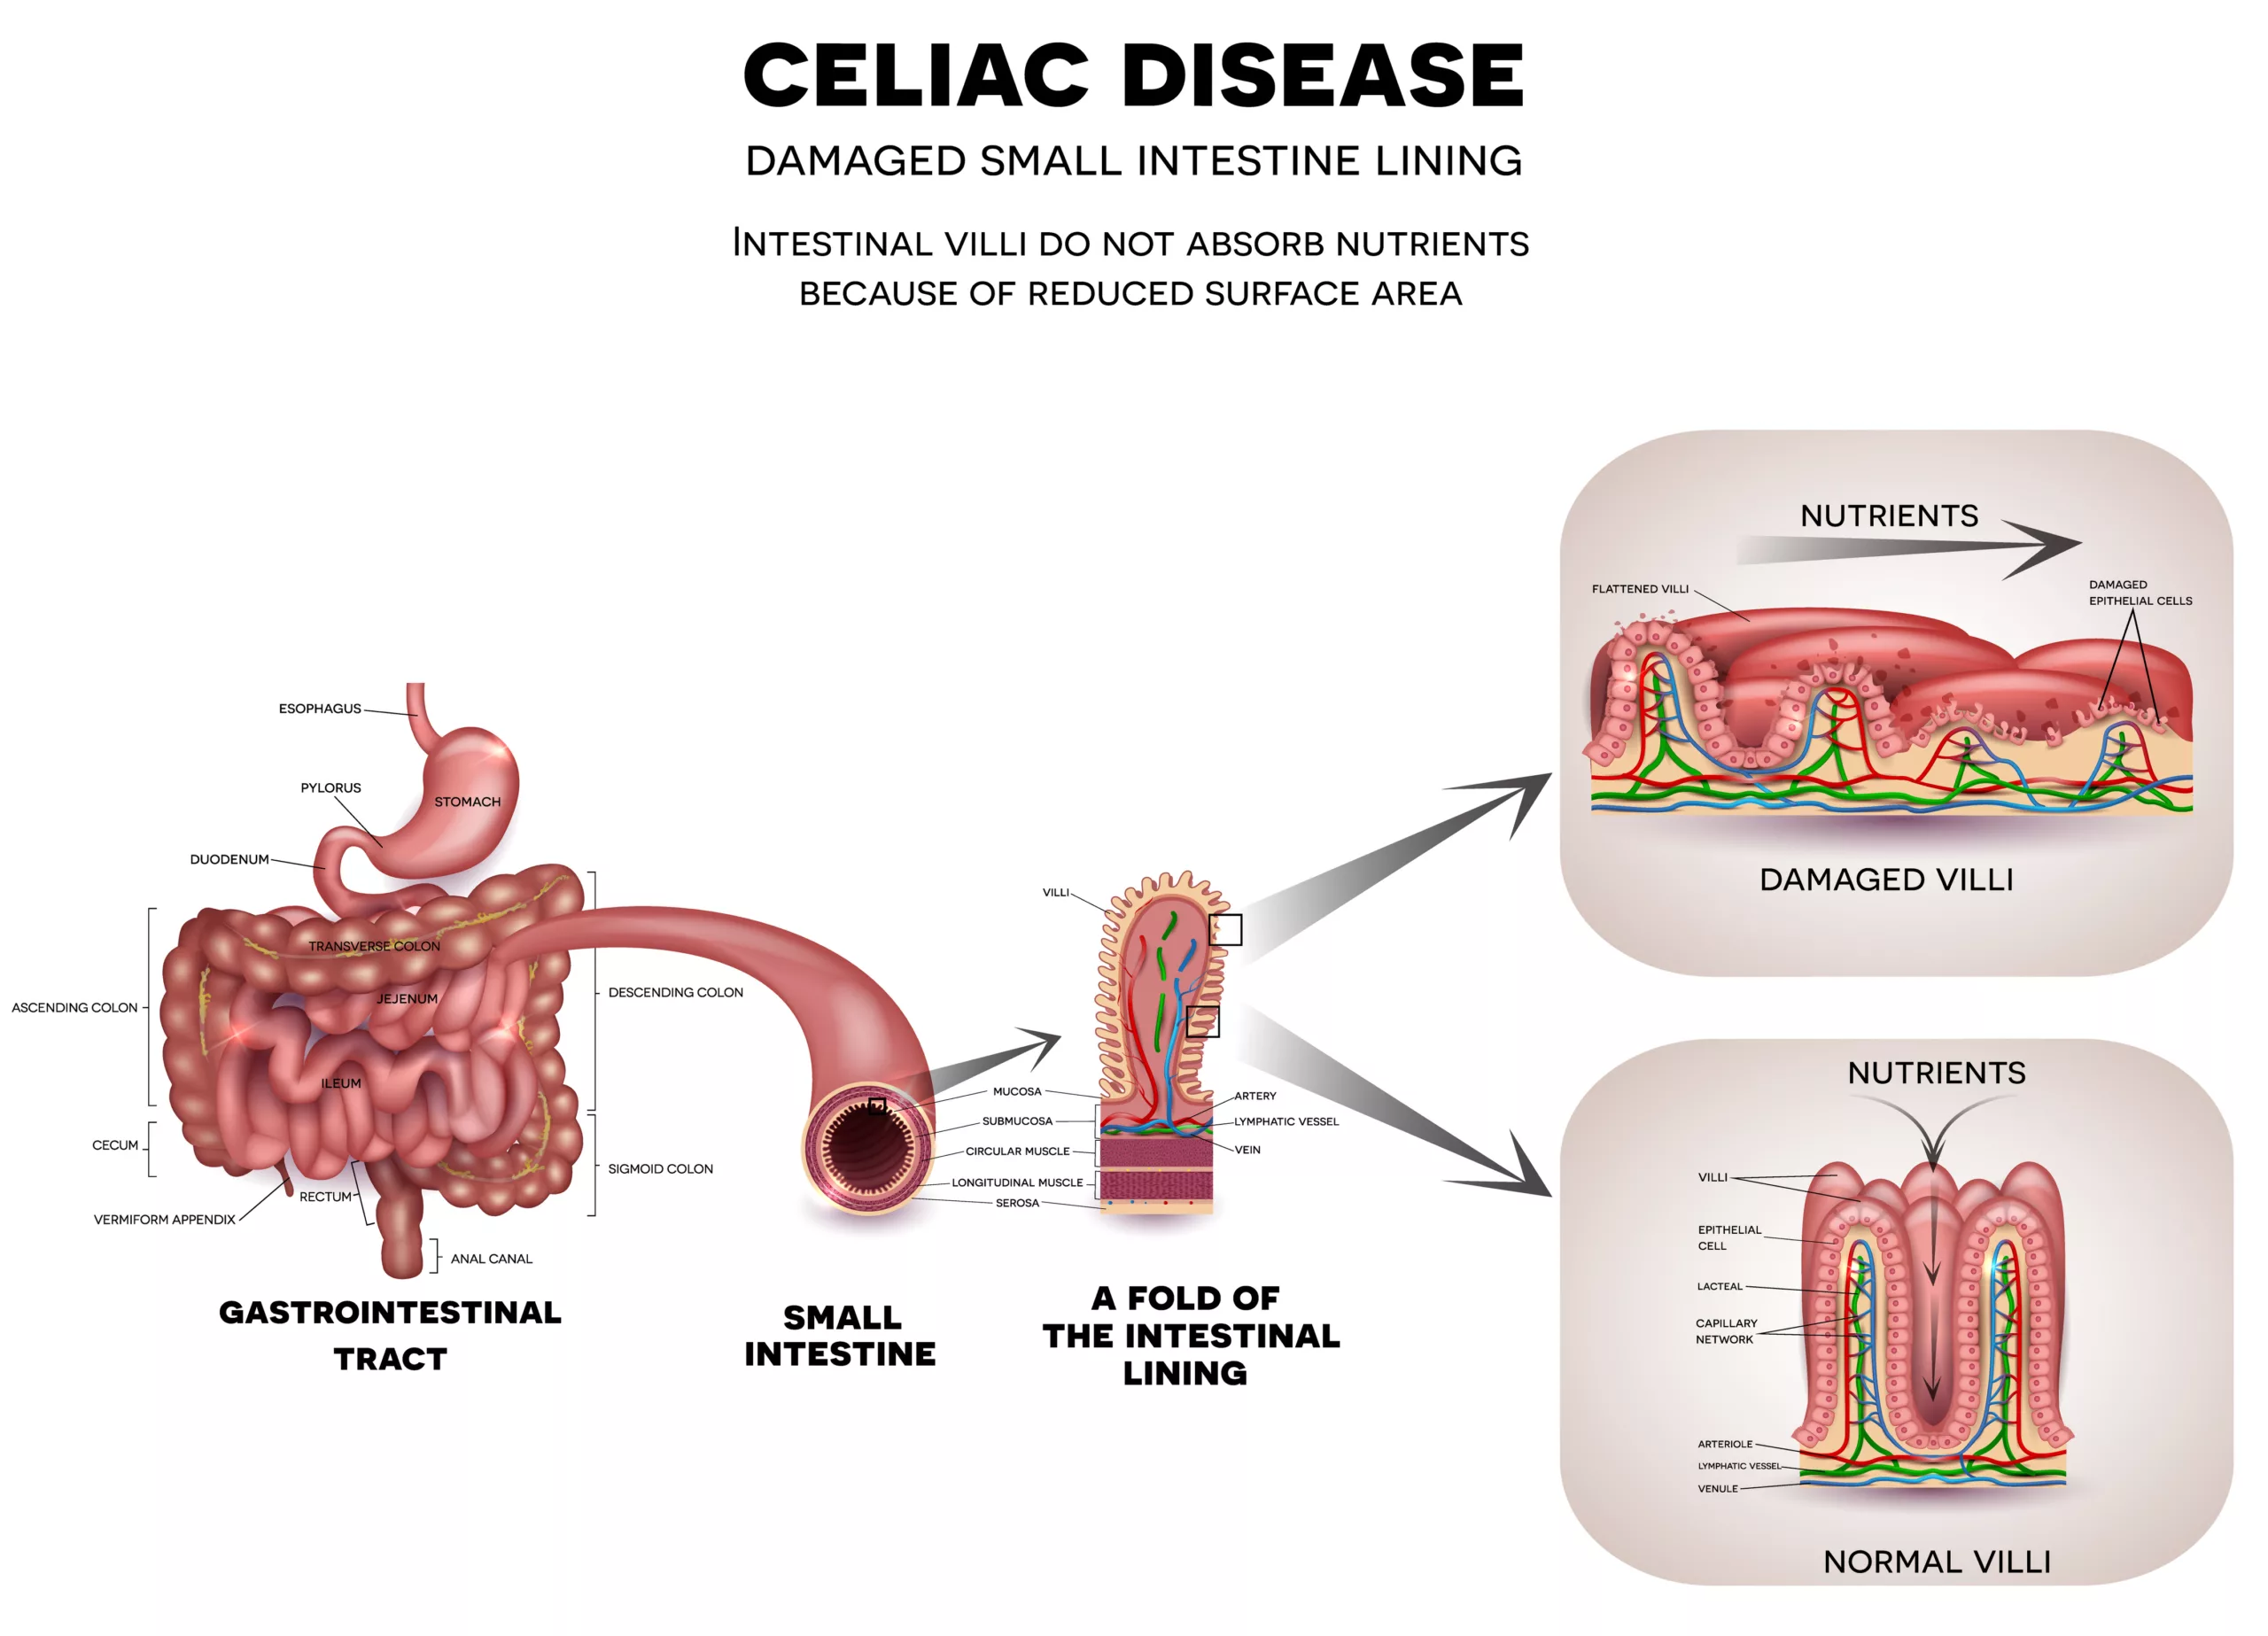 Gastrointestinal tract anatomy and Celiac disease affected small intestine villi. Unhealthy villi with damaged cells and healthy villi. Intestinal villi do not absorb nutrients because of reduced surface area.